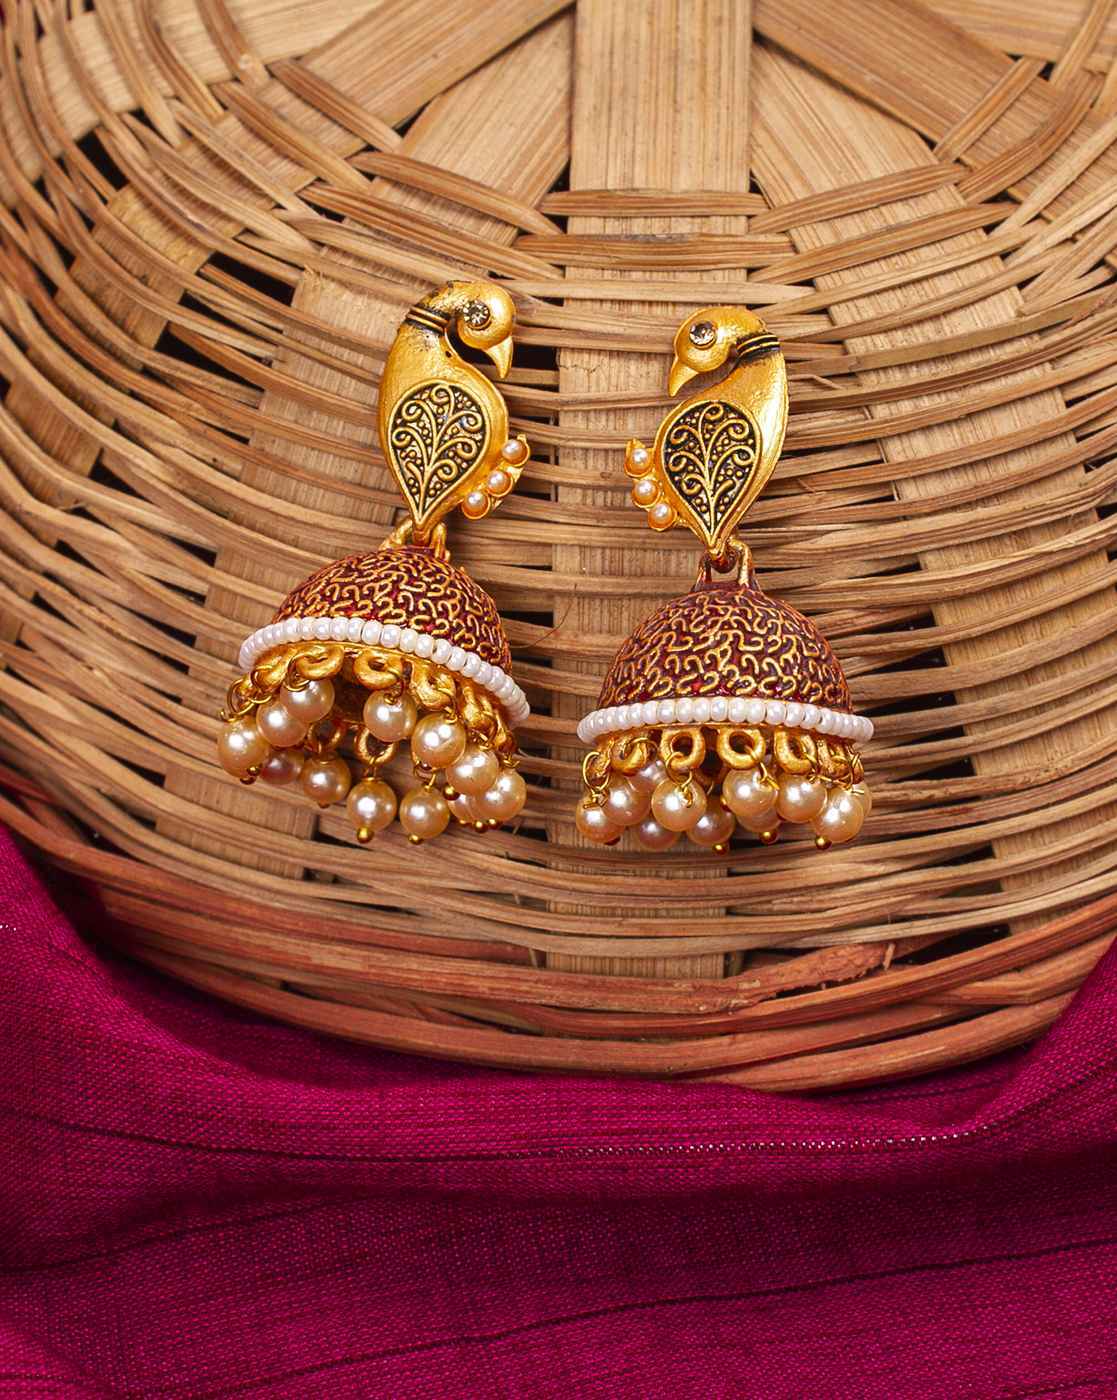 Buy Gold-toned Earrings for Women by The Pari Online